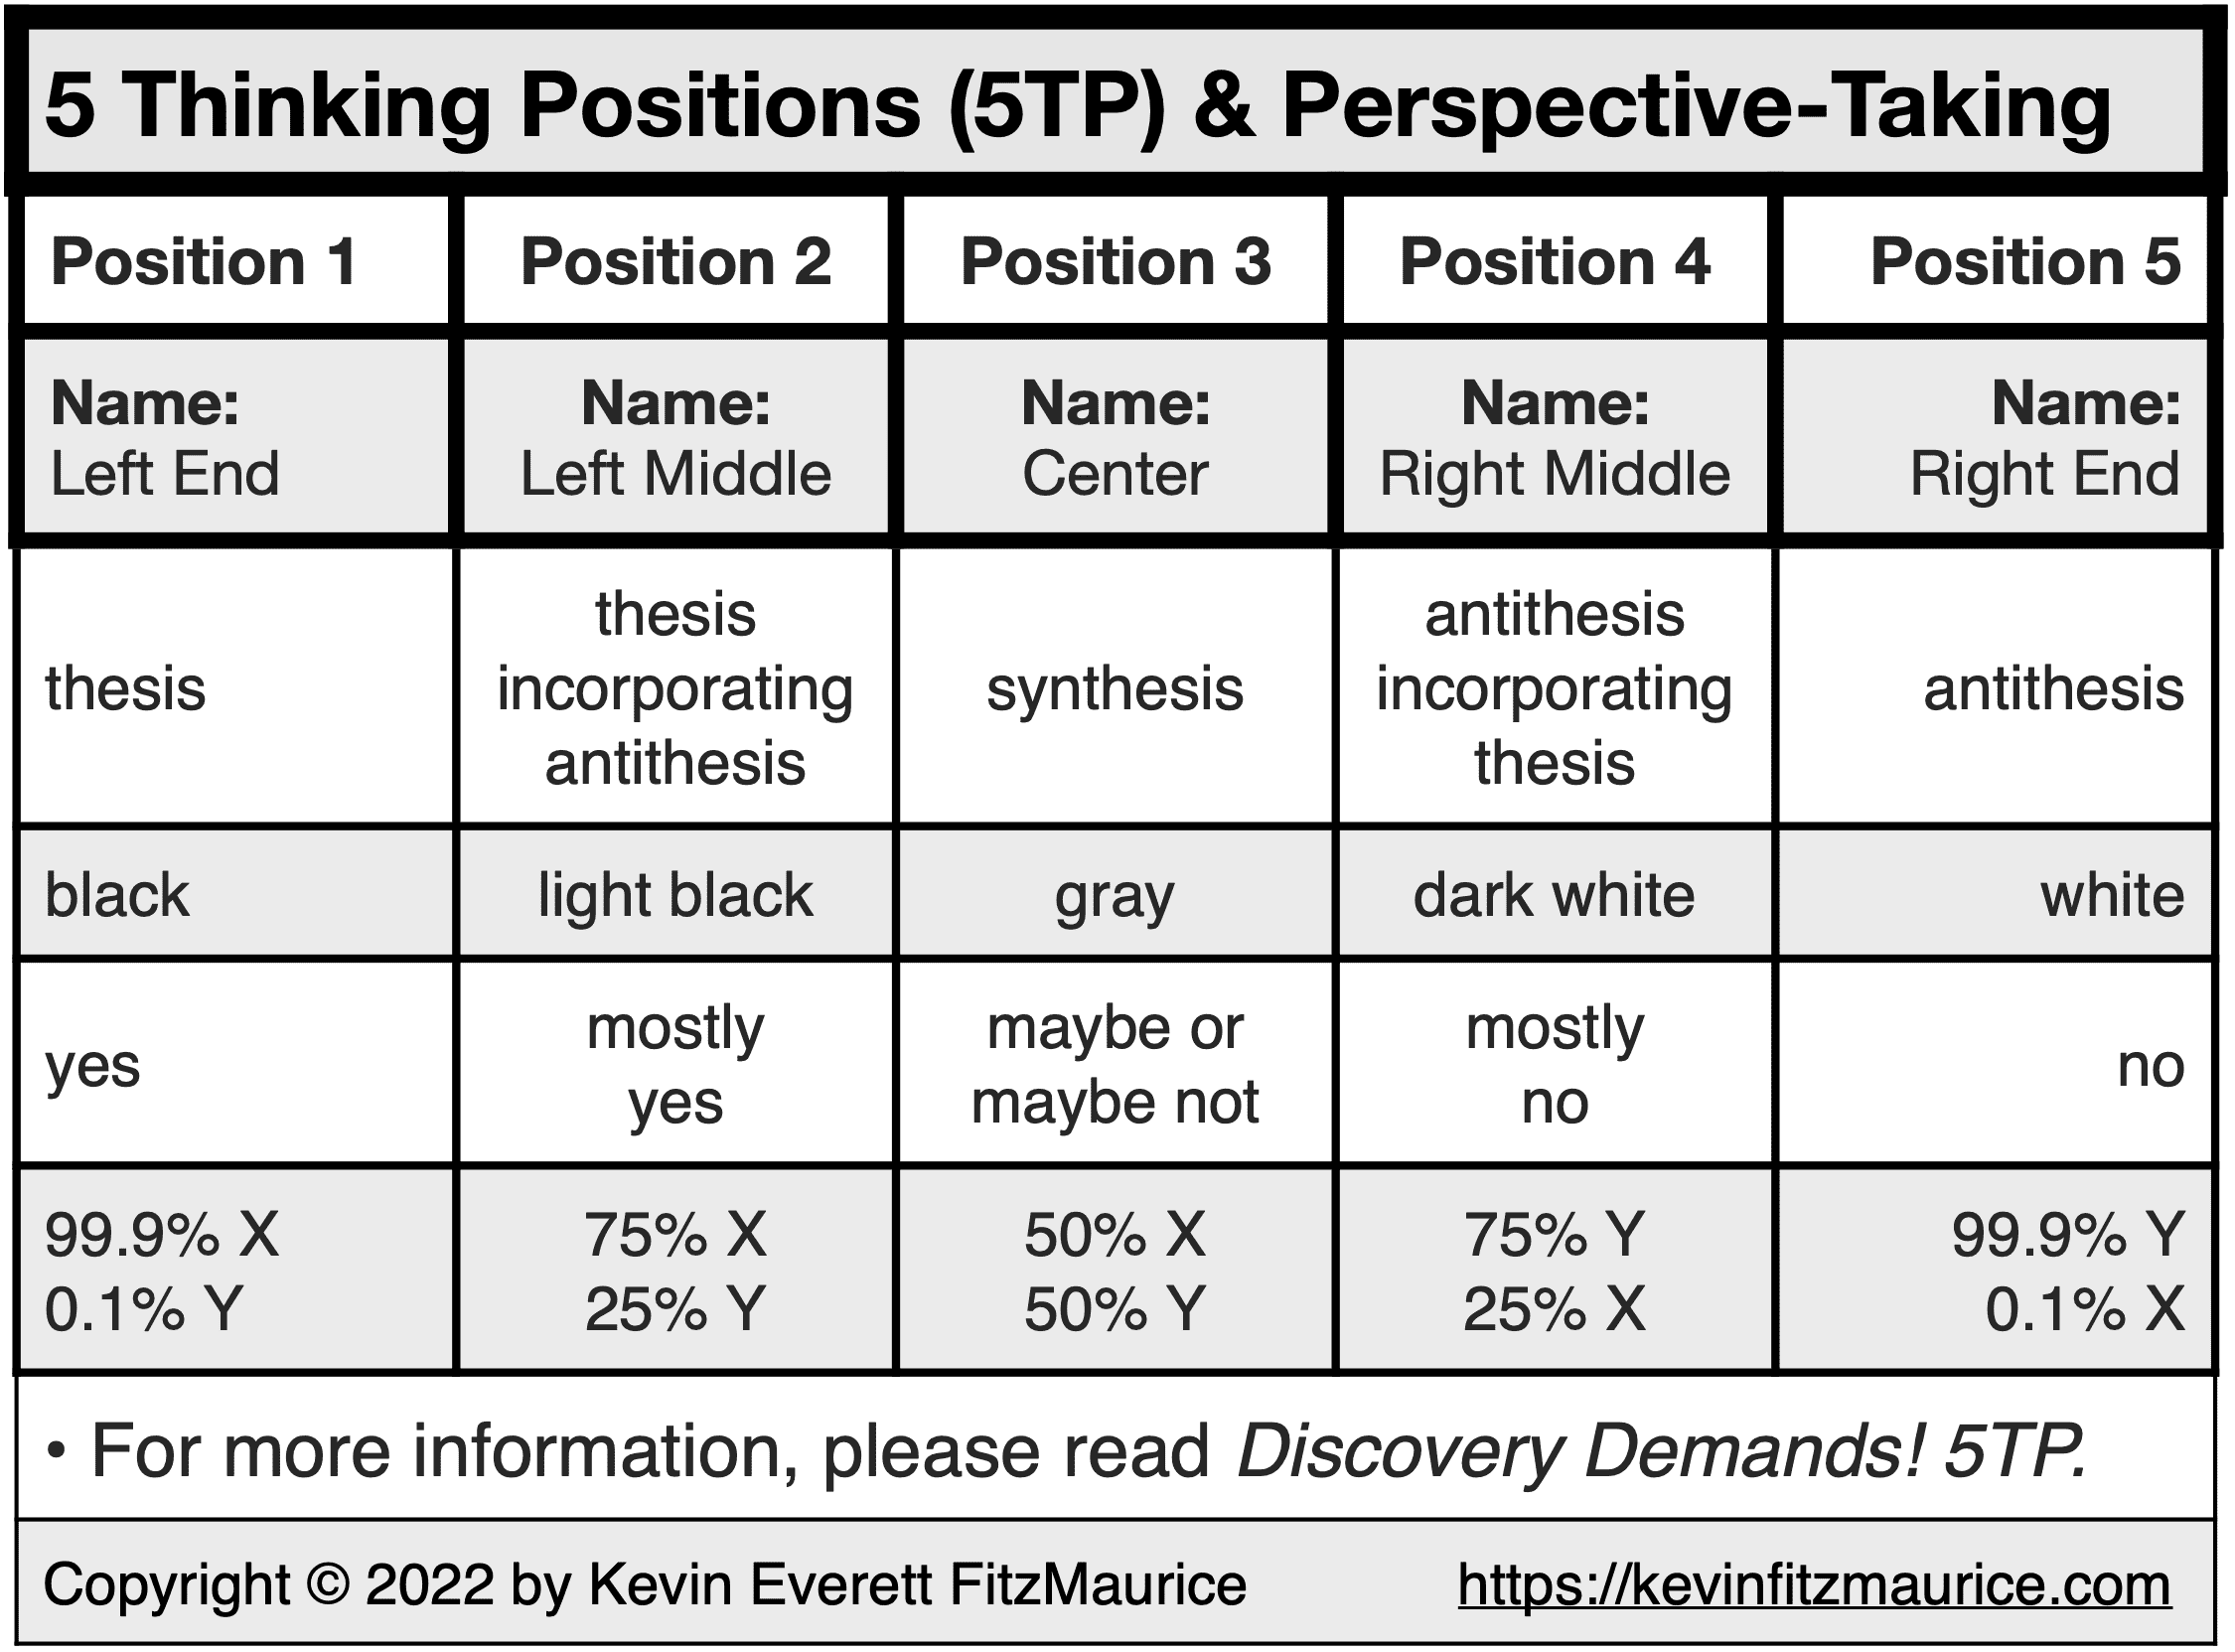 (5TP) The Five Thinking Positions & Perspective-Taking